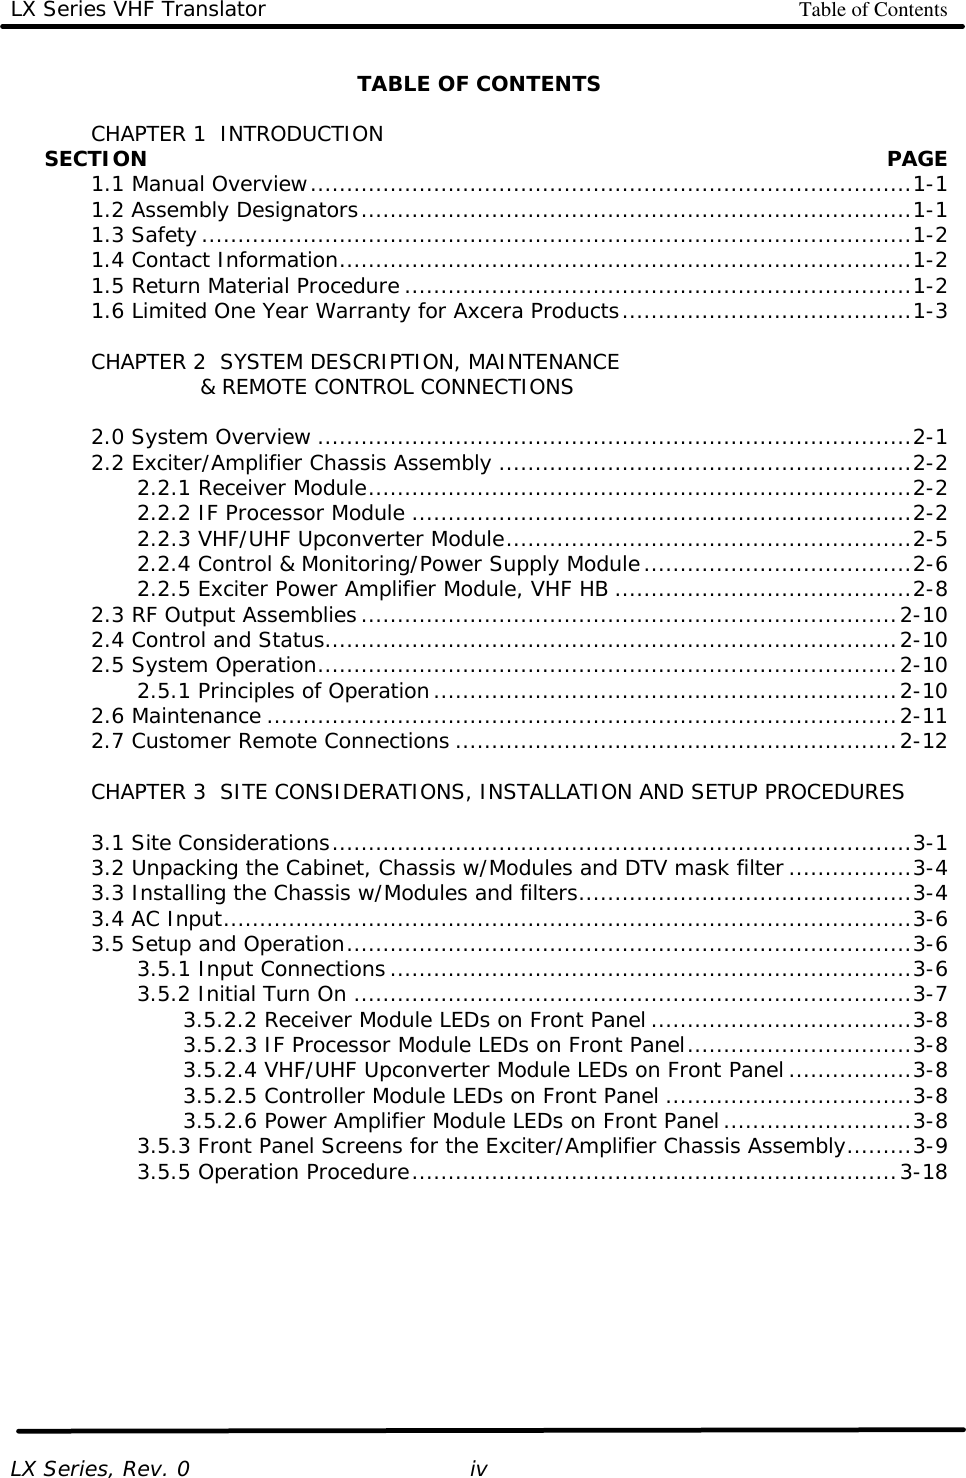 LX Series VHF Translator Table of Contents   LX Series, Rev. 0   iv TABLE OF CONTENTS   CHAPTER 1  INTRODUCTION      SECTION    PAGE  1.1 Manual Overview...................................................................................1-1  1.2 Assembly Designators............................................................................1-1  1.3 Safety..................................................................................................1-2  1.4 Contact Information...............................................................................1-2  1.5 Return Material Procedure ......................................................................1-2  1.6 Limited One Year Warranty for Axcera Products........................................1-3   CHAPTER 2  SYSTEM DESCRIPTION, MAINTENANCE              &amp; REMOTE CONTROL CONNECTIONS   2.0 System Overview ..................................................................................2-1  2.2 Exciter/Amplifier Chassis Assembly .........................................................2-2     2.2.1 Receiver Module...........................................................................2-2     2.2.2 IF Processor Module .....................................................................2-2     2.2.3 VHF/UHF Upconverter Module........................................................2-5     2.2.4 Control &amp; Monitoring/Power Supply Module.....................................2-6     2.2.5 Exciter Power Amplifier Module, VHF HB .........................................2-8  2.3 RF Output Assemblies..........................................................................2-10  2.4 Control and Status...............................................................................2-10  2.5 System Operation................................................................................2-10     2.5.1 Principles of Operation................................................................2-10  2.6 Maintenance .......................................................................................2-11  2.7 Customer Remote Connections .............................................................2-12   CHAPTER 3  SITE CONSIDERATIONS, INSTALLATION AND SETUP PROCEDURES     3.1 Site Considerations................................................................................3-1  3.2 Unpacking the Cabinet, Chassis w/Modules and DTV mask filter .................3-4  3.3 Installing the Chassis w/Modules and filters..............................................3-4  3.4 AC Input...............................................................................................3-6  3.5 Setup and Operation..............................................................................3-6     3.5.1 Input Connections........................................................................3-6     3.5.2 Initial Turn On .............................................................................3-7     3.5.2.2 Receiver Module LEDs on Front Panel ....................................3-8     3.5.2.3 IF Processor Module LEDs on Front Panel...............................3-8     3.5.2.4 VHF/UHF Upconverter Module LEDs on Front Panel .................3-8     3.5.2.5 Controller Module LEDs on Front Panel ..................................3-8     3.5.2.6 Power Amplifier Module LEDs on Front Panel..........................3-8     3.5.3 Front Panel Screens for the Exciter/Amplifier Chassis Assembly.........3-9     3.5.5 Operation Procedure...................................................................3-18 